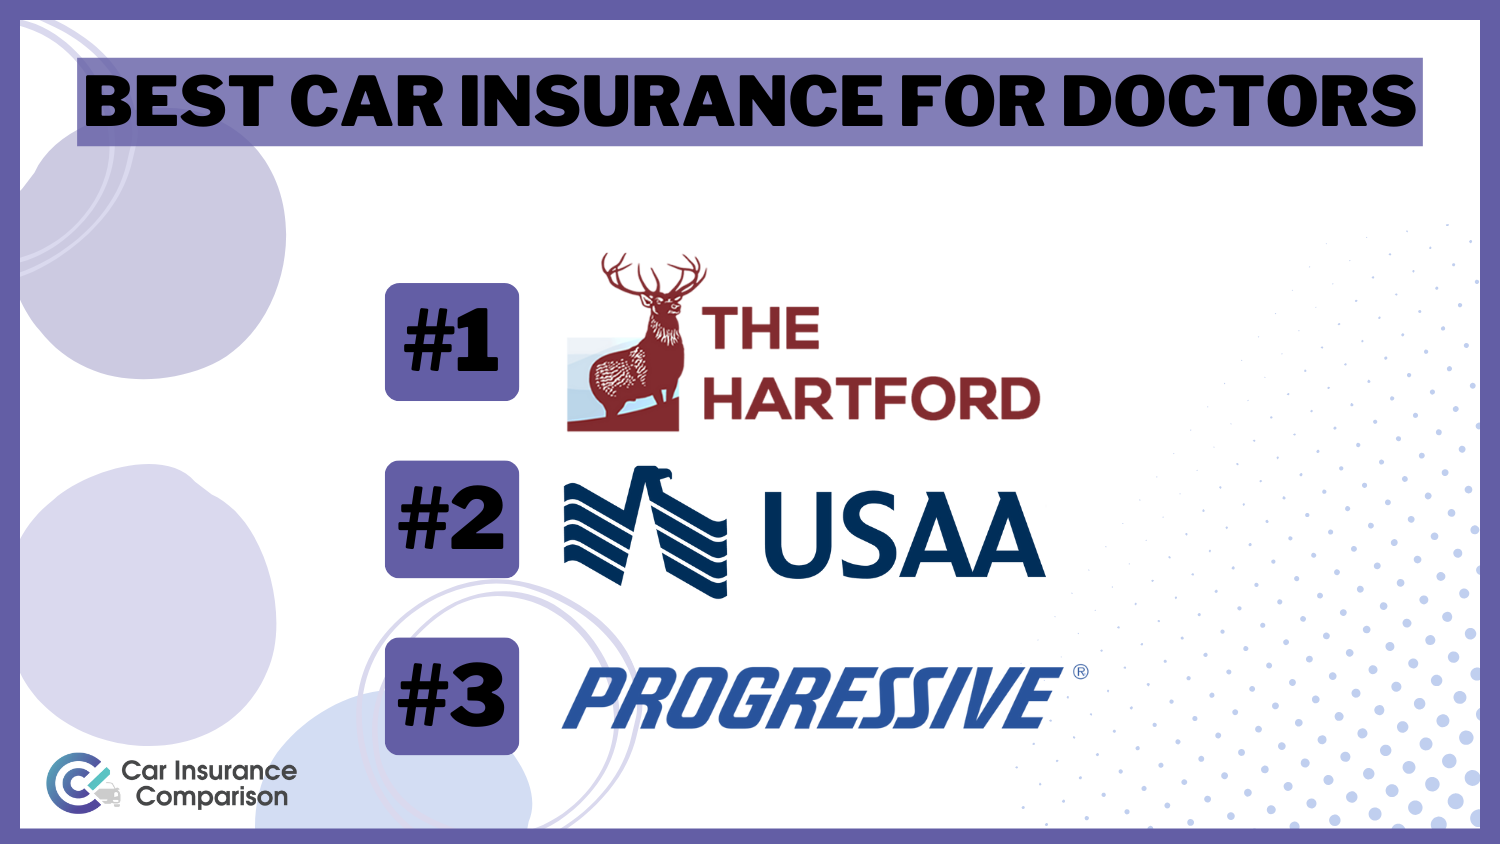 Best Car Insurance for Doctors : The Hartford, USAA, and Progressive